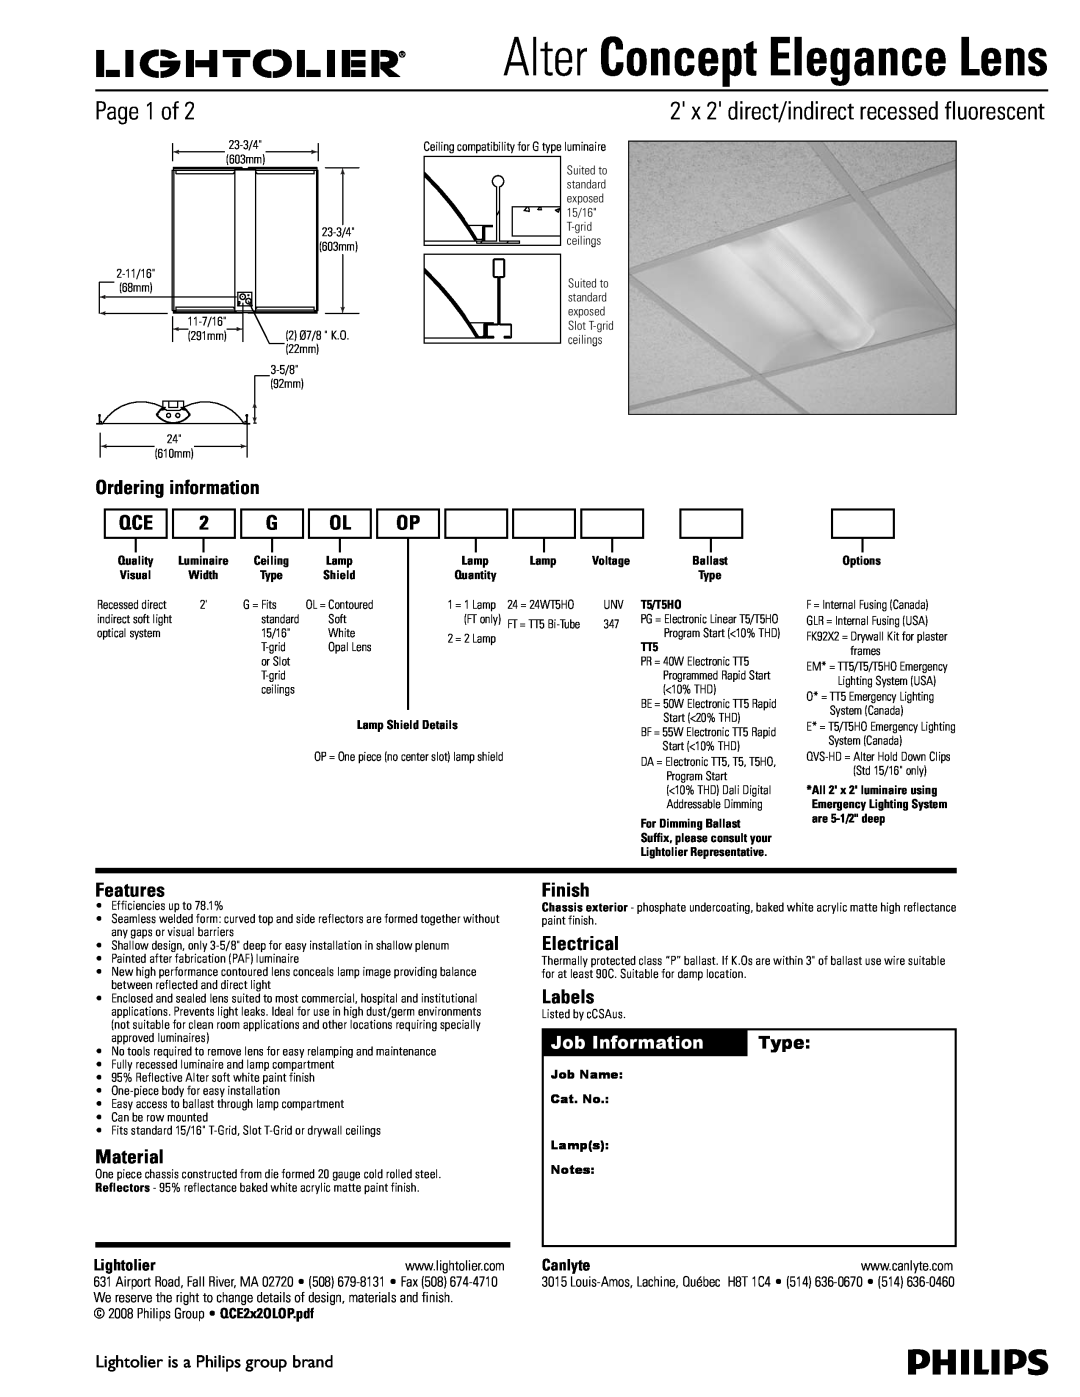 Lightolier QCE2X2OLOP manual Alter Concept Elegance Lens, Page 1 of, 2 x 2 direct/indirect recessed fluorescent, Features 